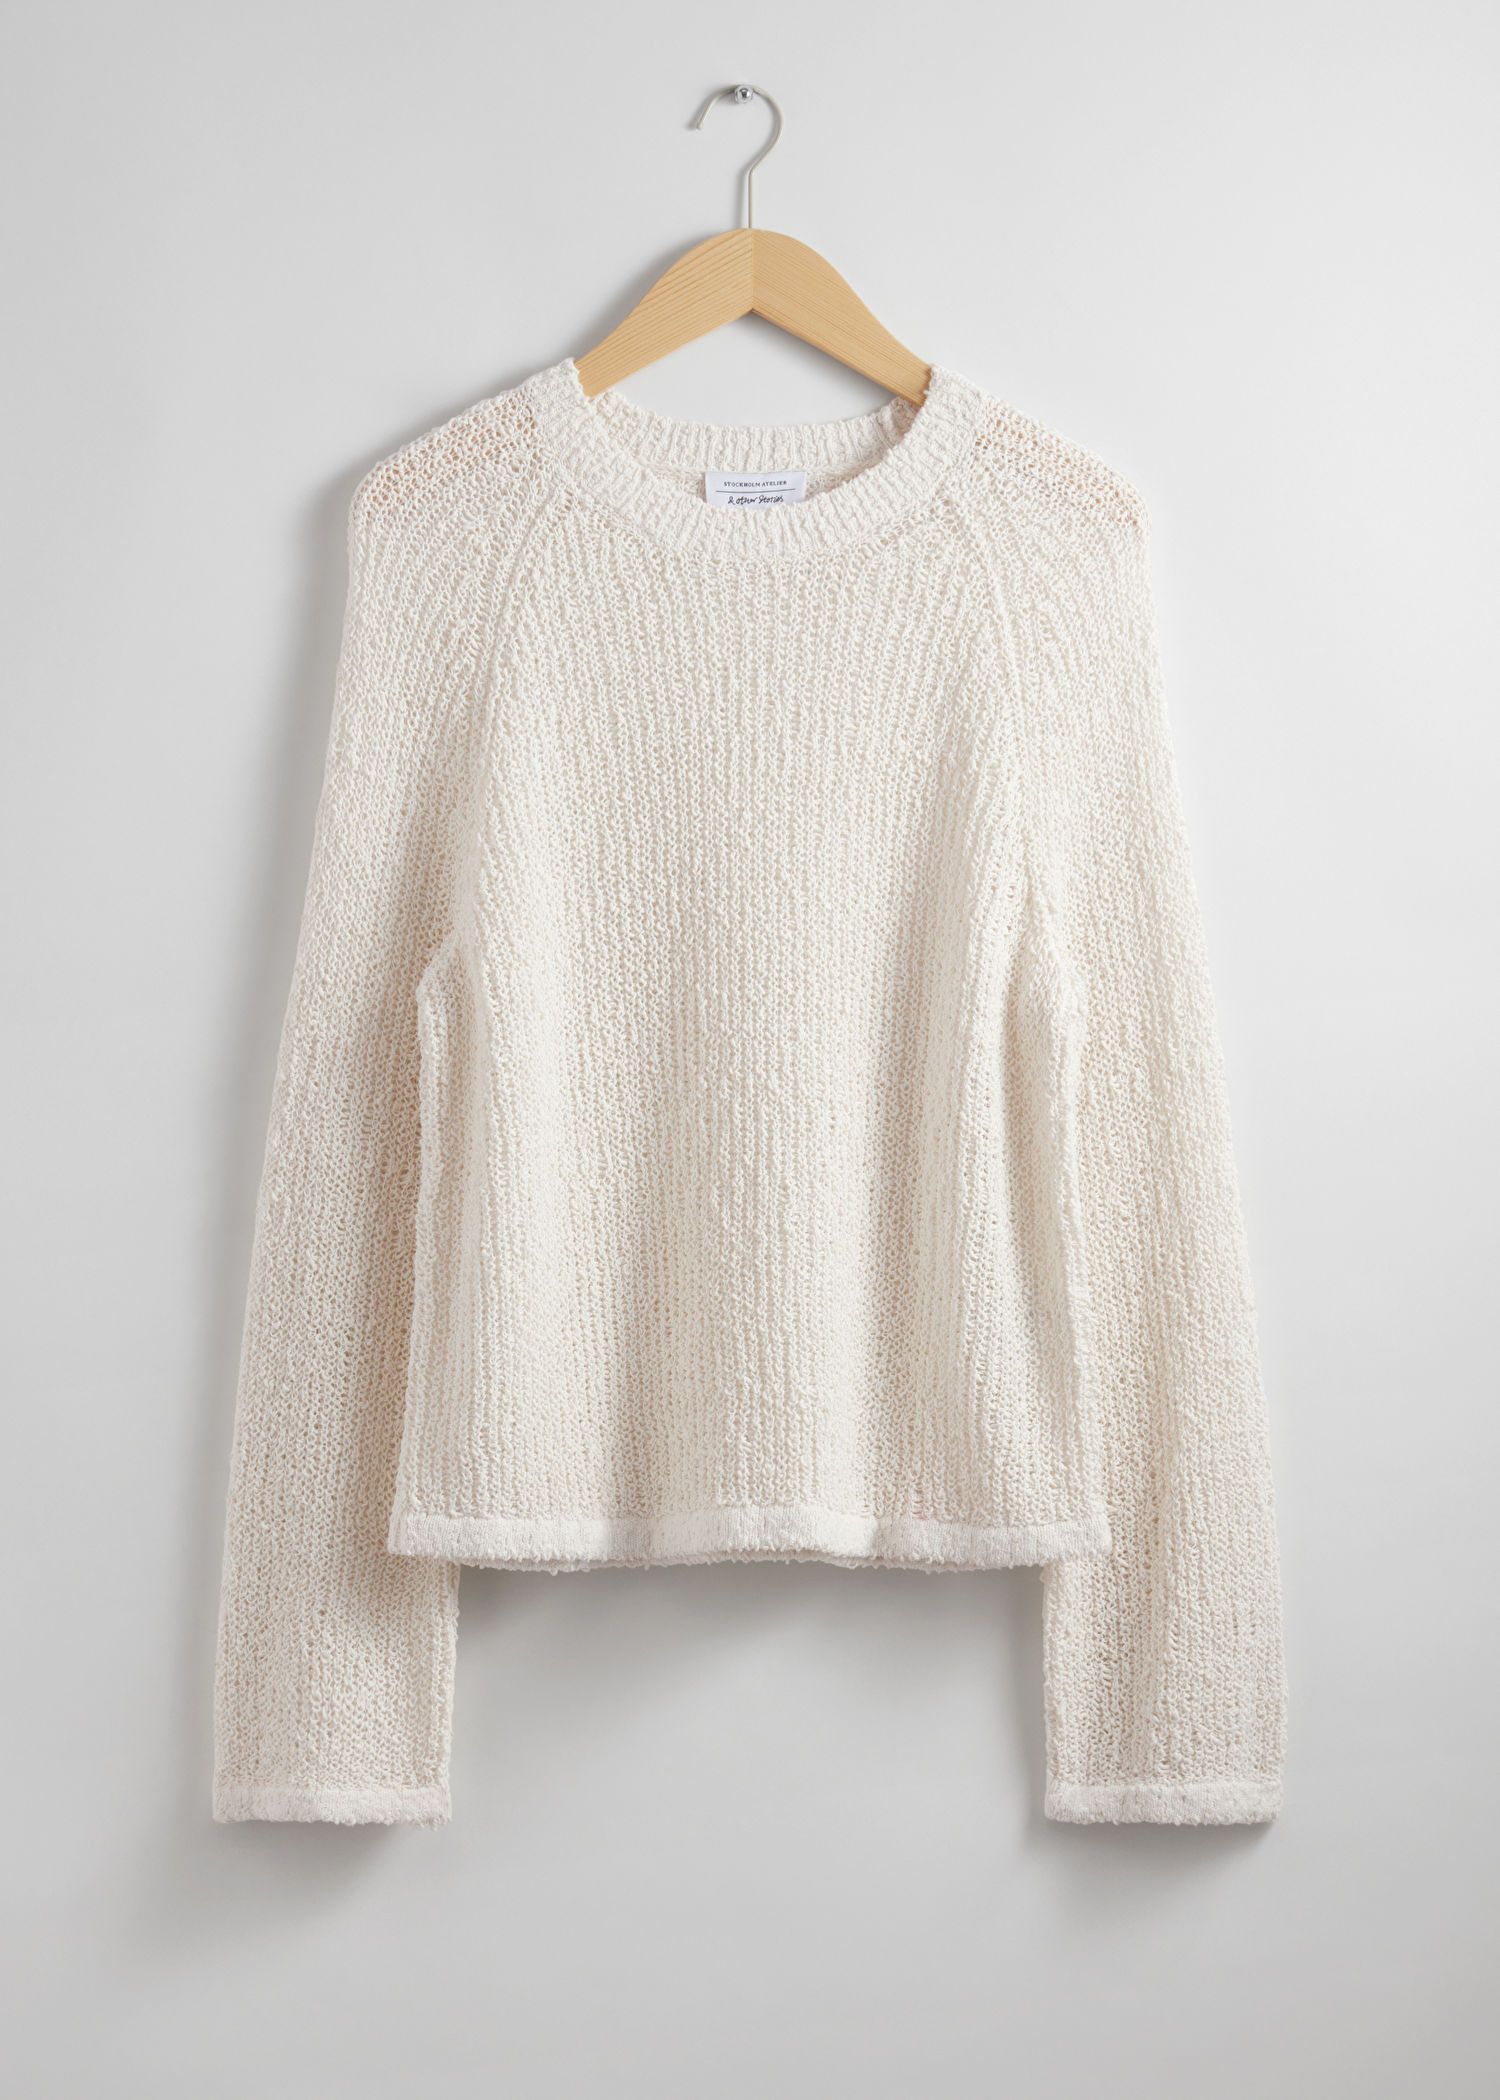 Silk-Blend Knit Top | & Other Stories US